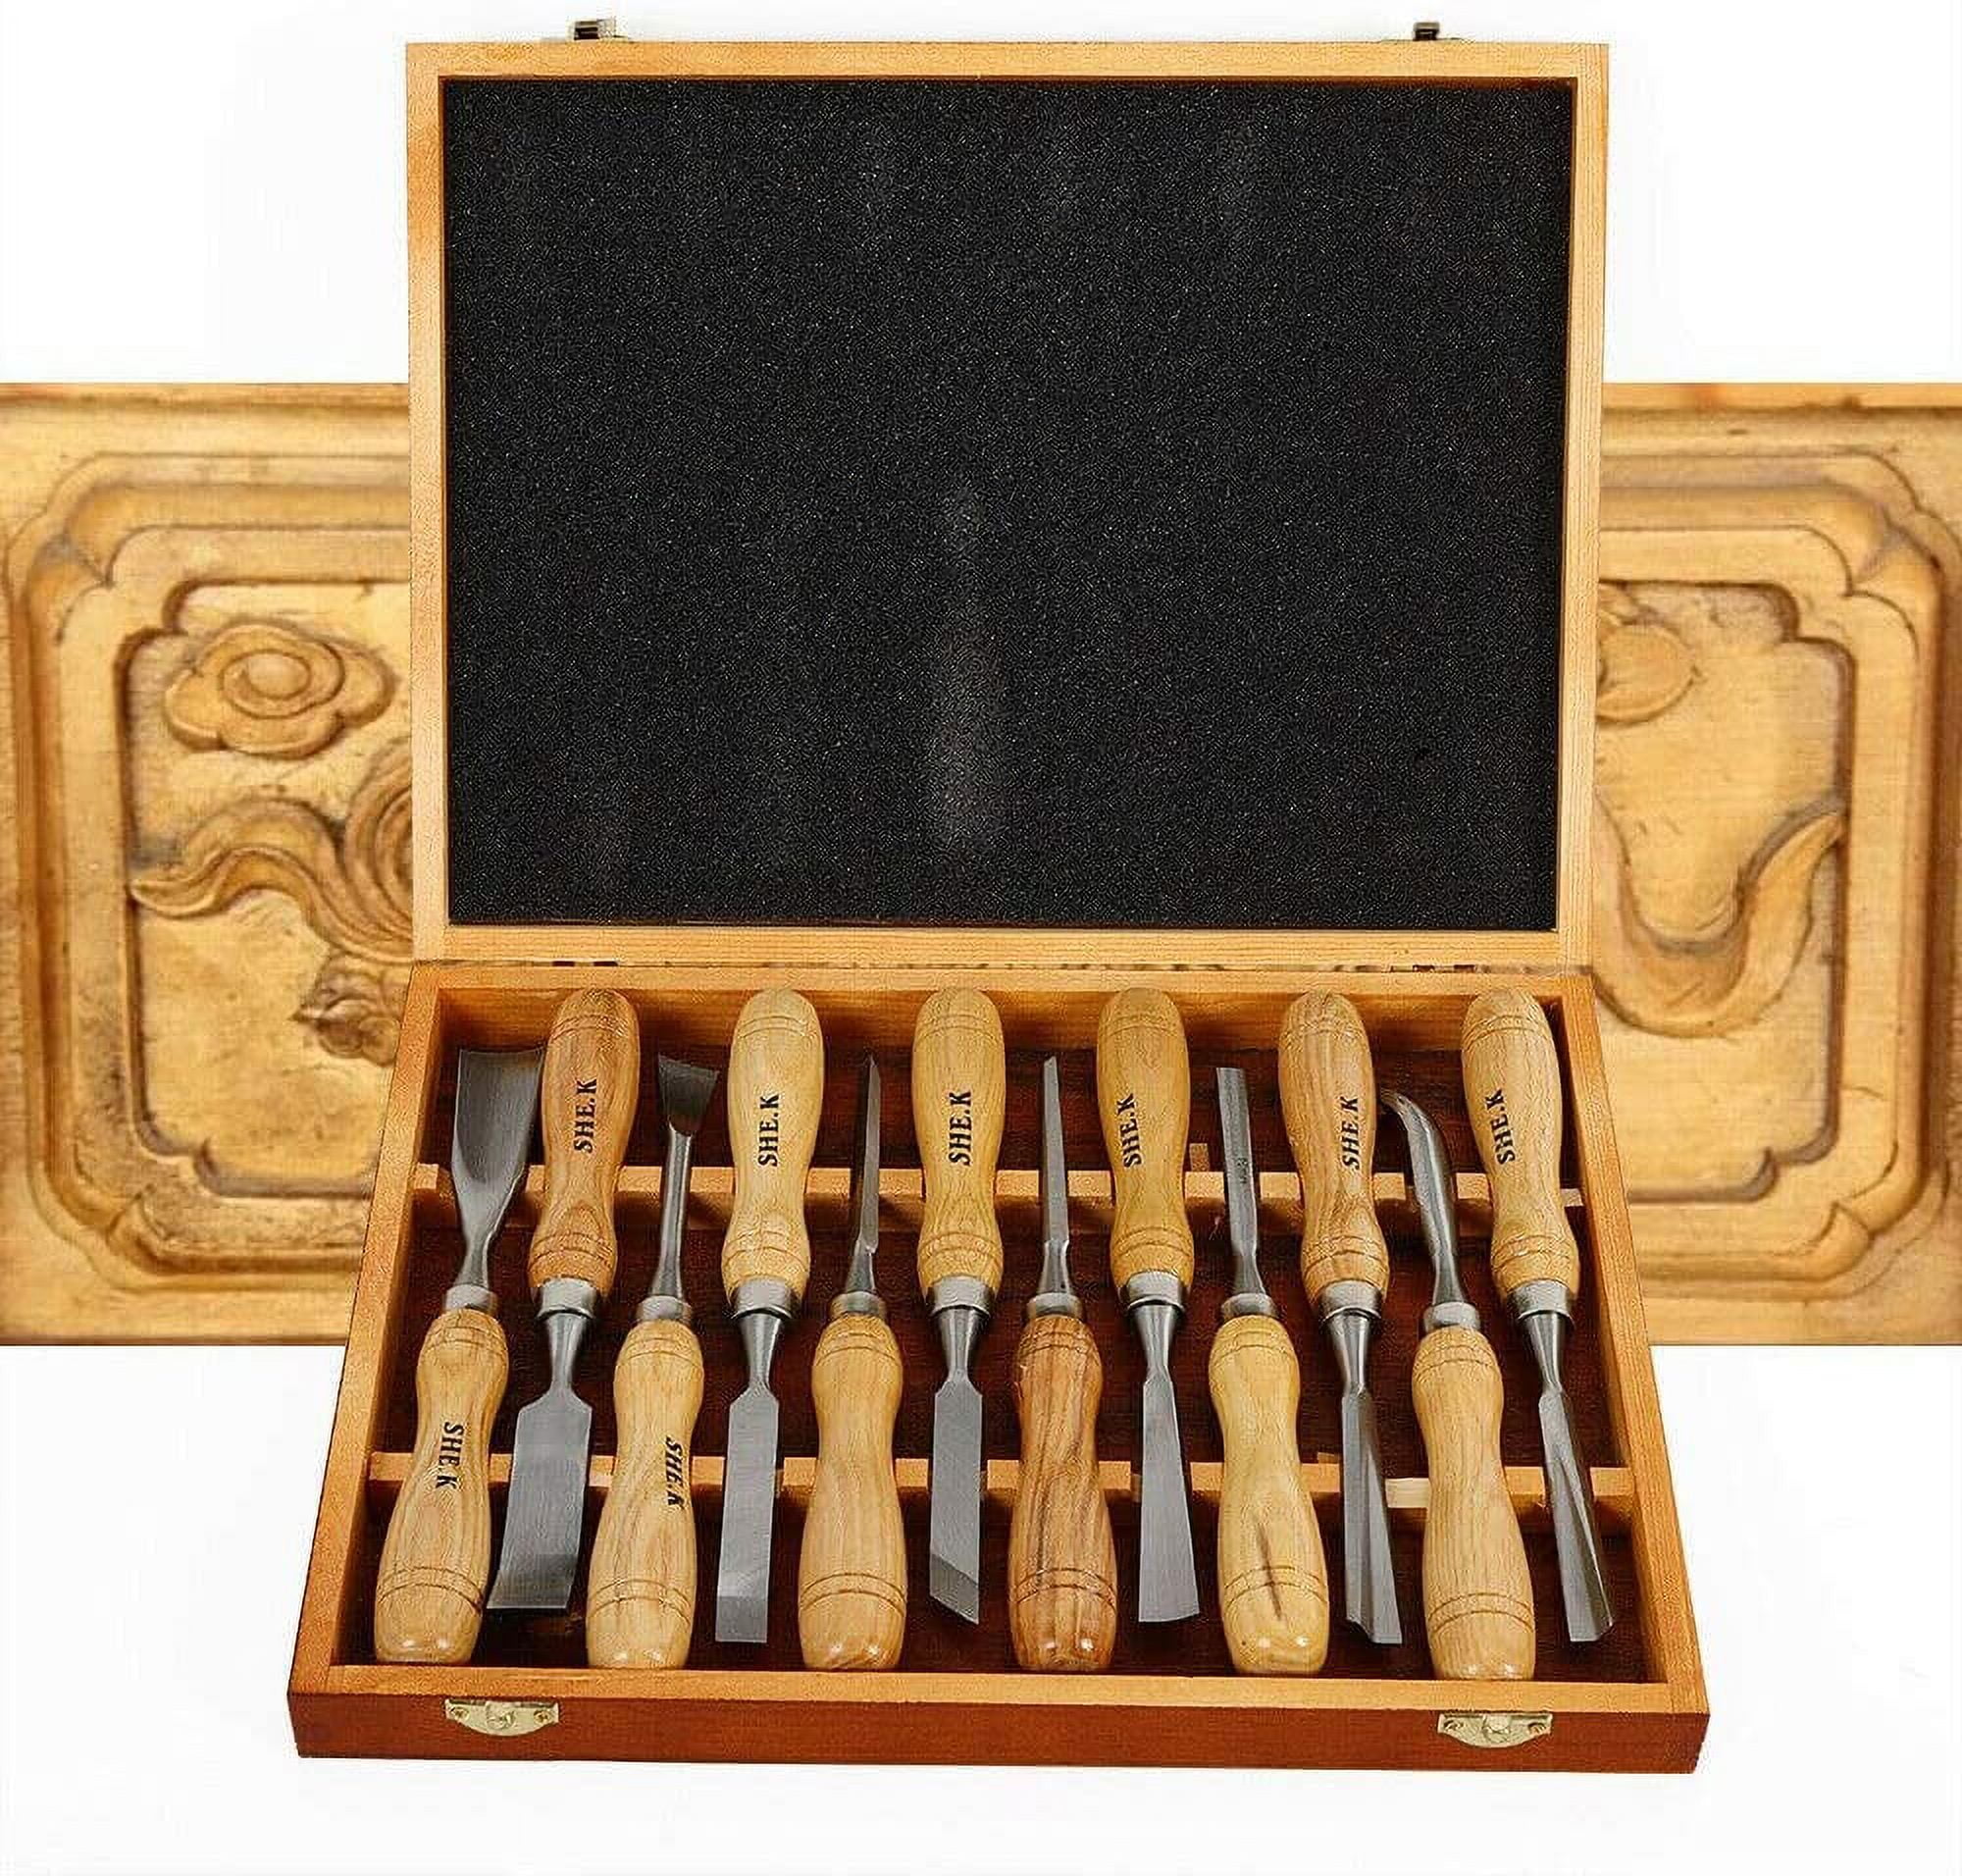 12 Piece Wood Carving Hand Chisel Tool Set Professional Woodworking Go 